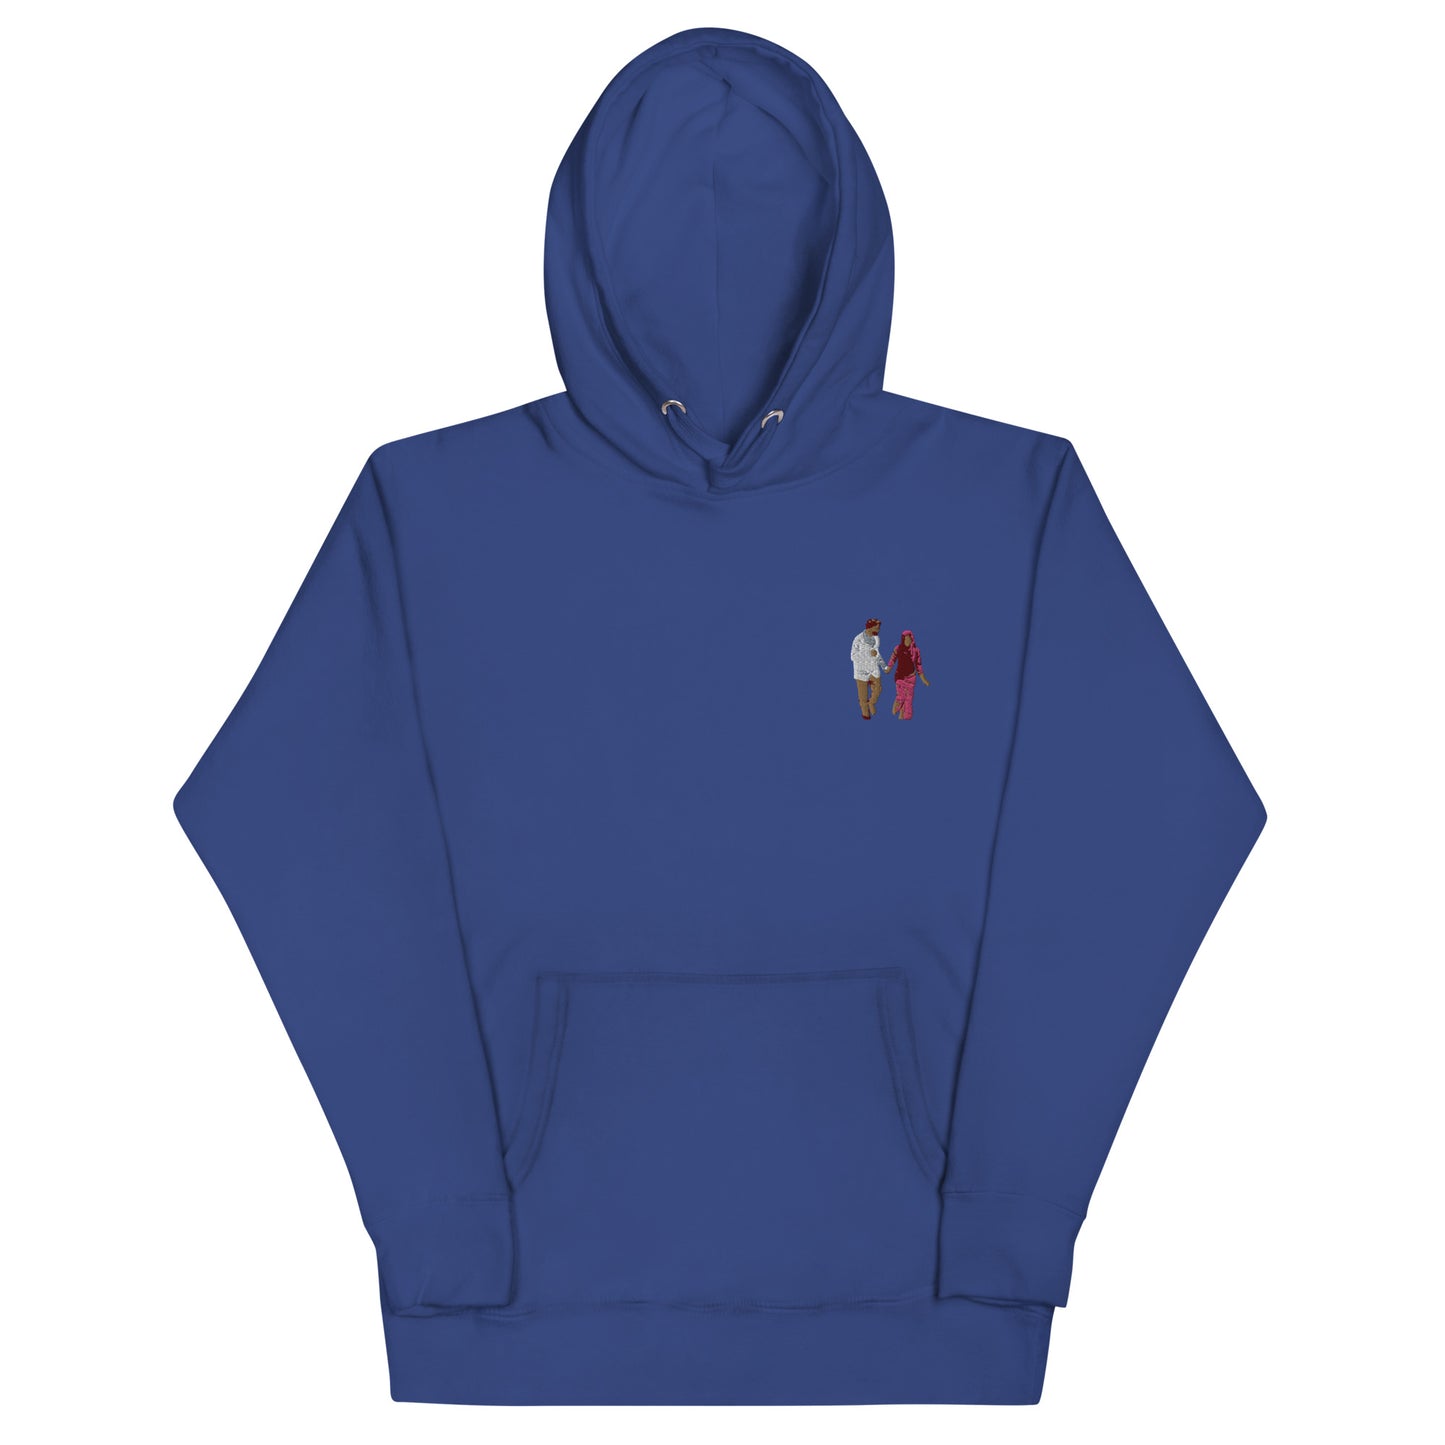 Full Colour Embroidered Hoodie